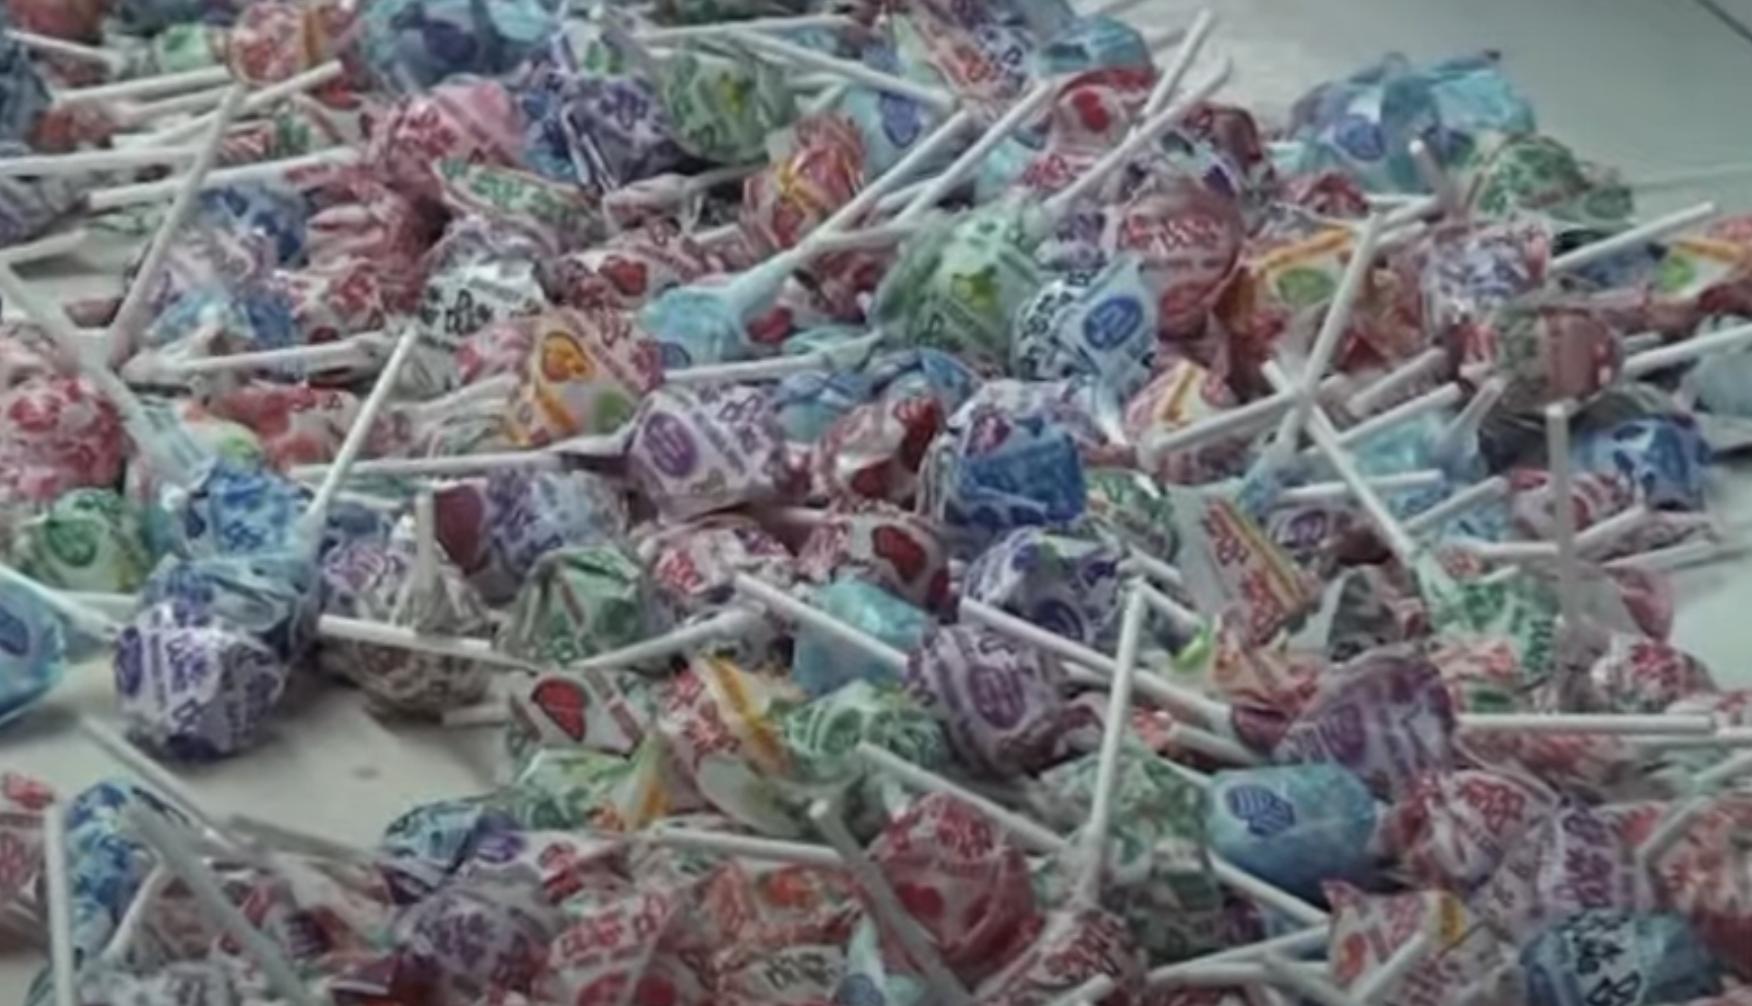 A pile of assorted, unwrapped Dum Dums lollipops scattered on a surface